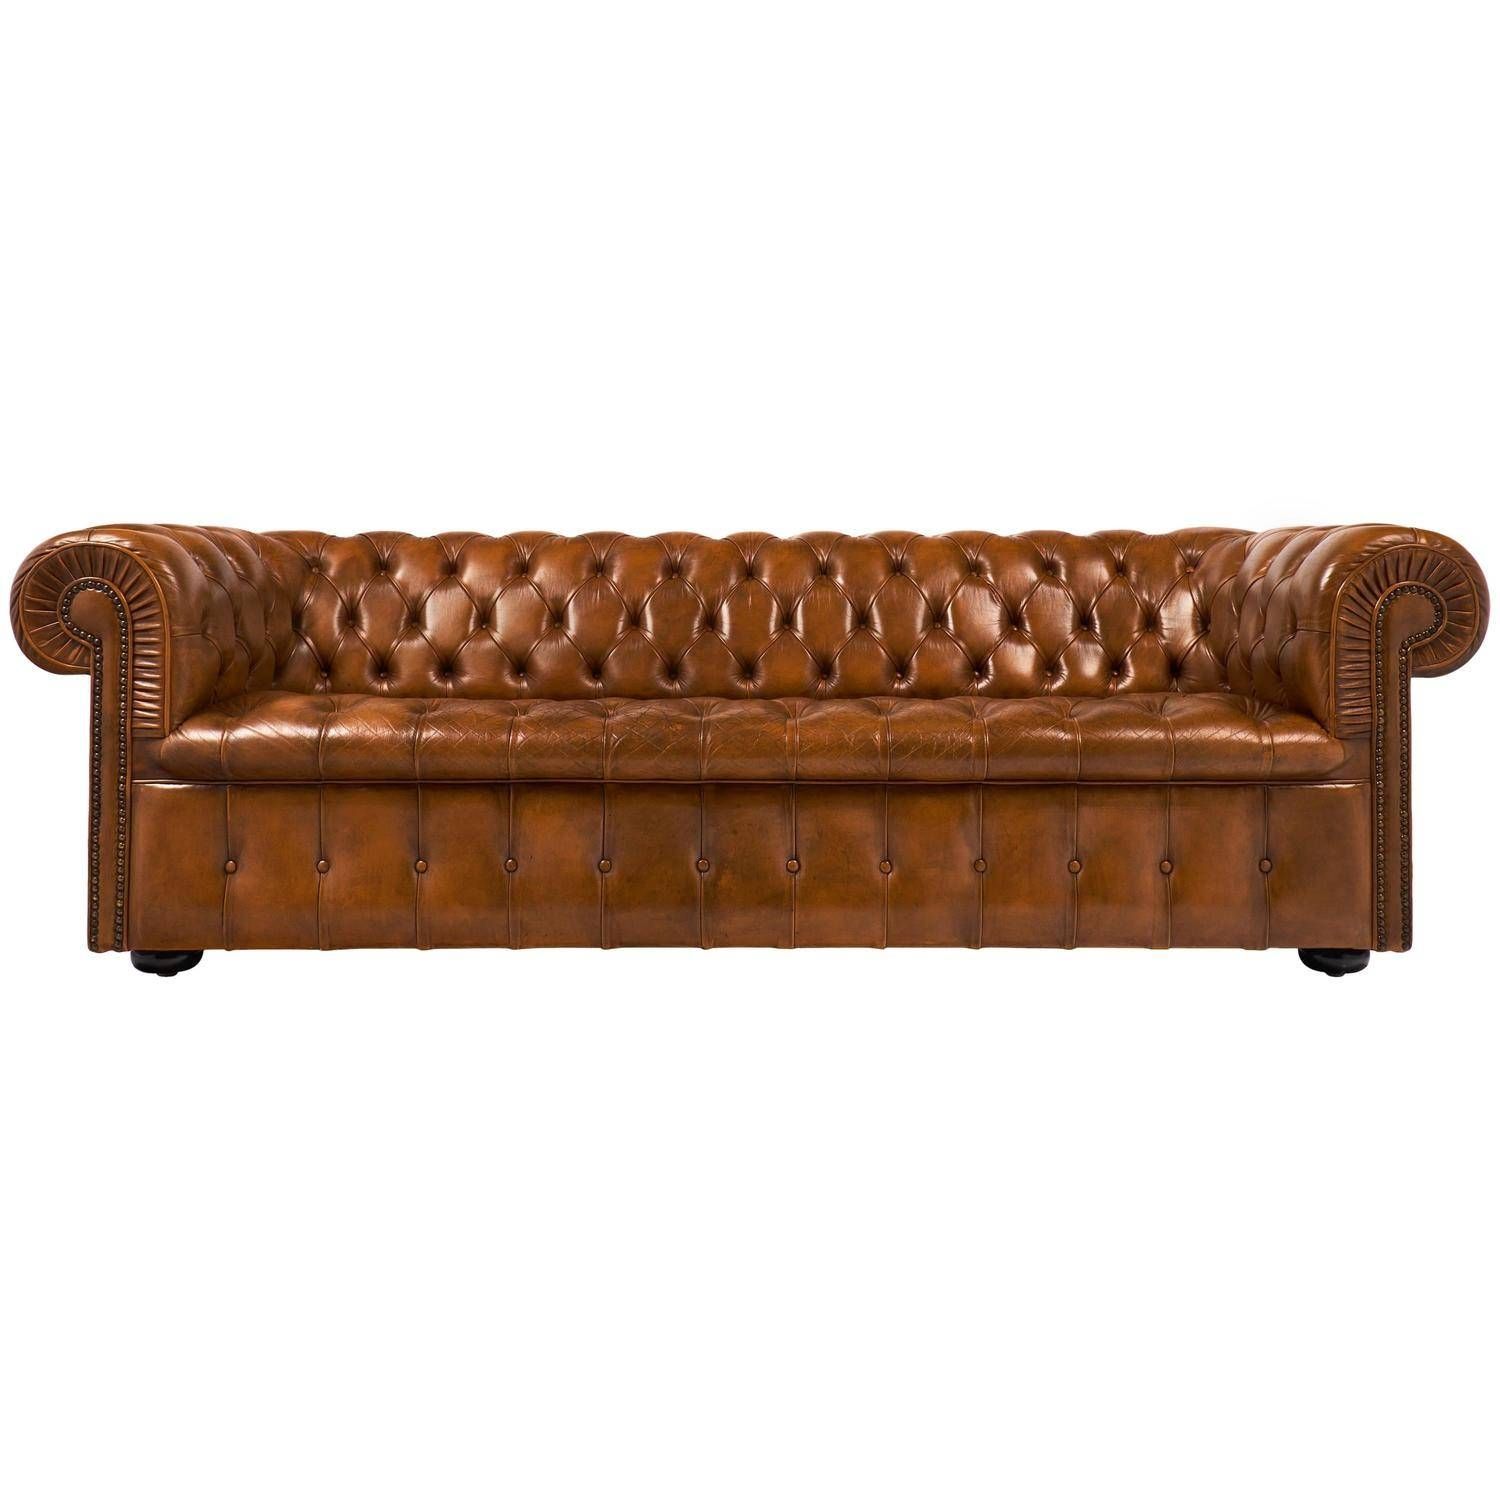 Vintage English Cognac Leather Chesterfield Sofa At 1stdibs Within Vintage Chesterfield Sofas (Photo 10 of 30)